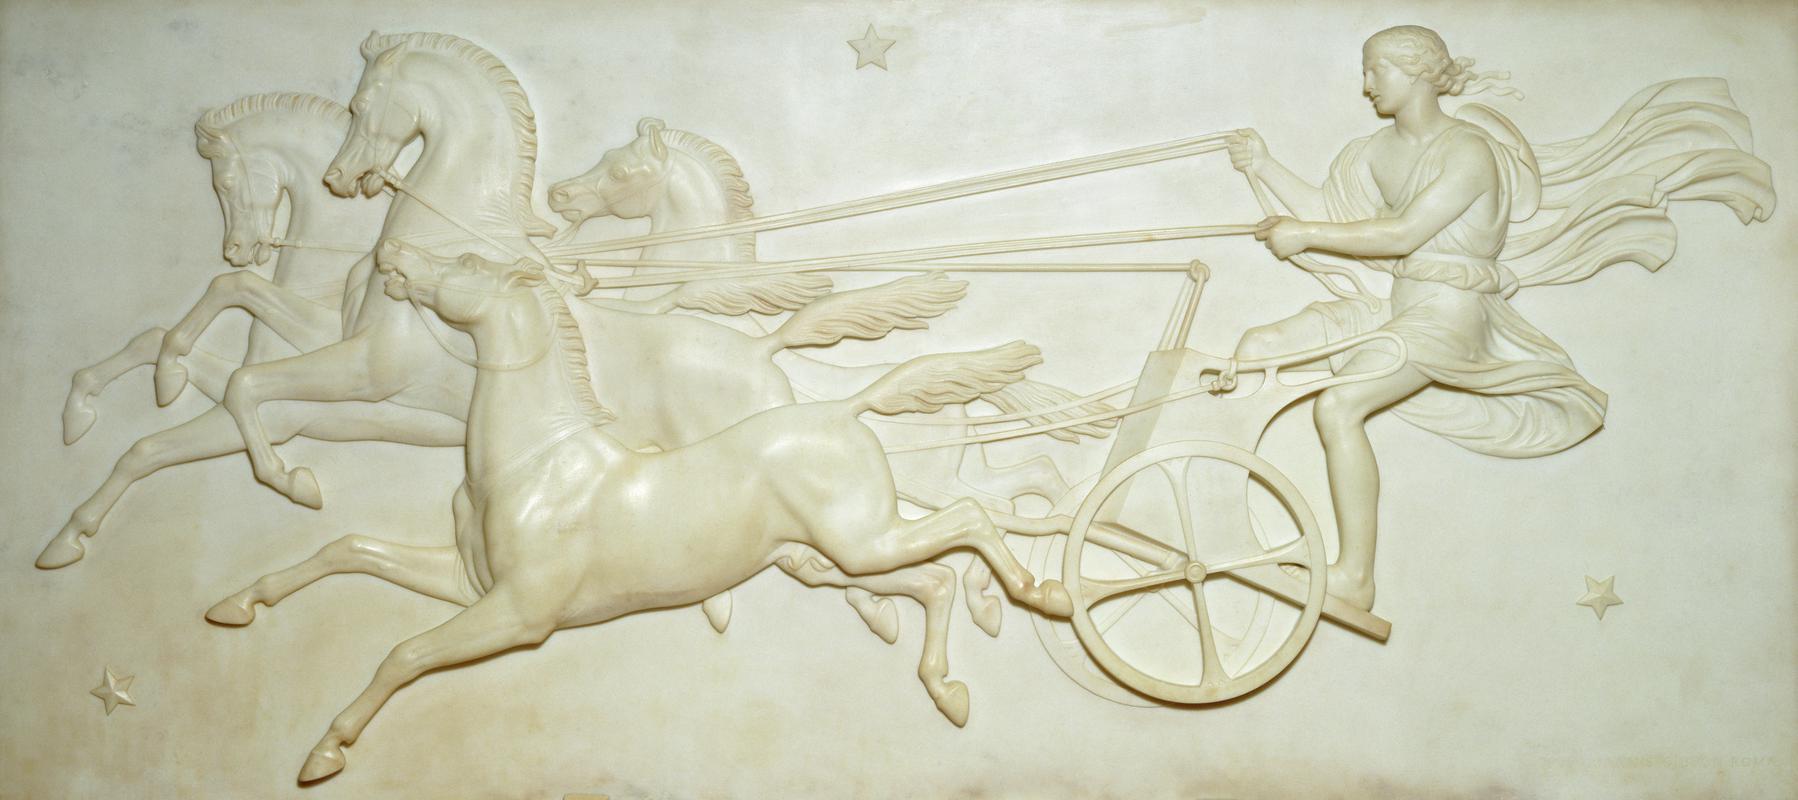 Phaeton driving the chariot of the sun.